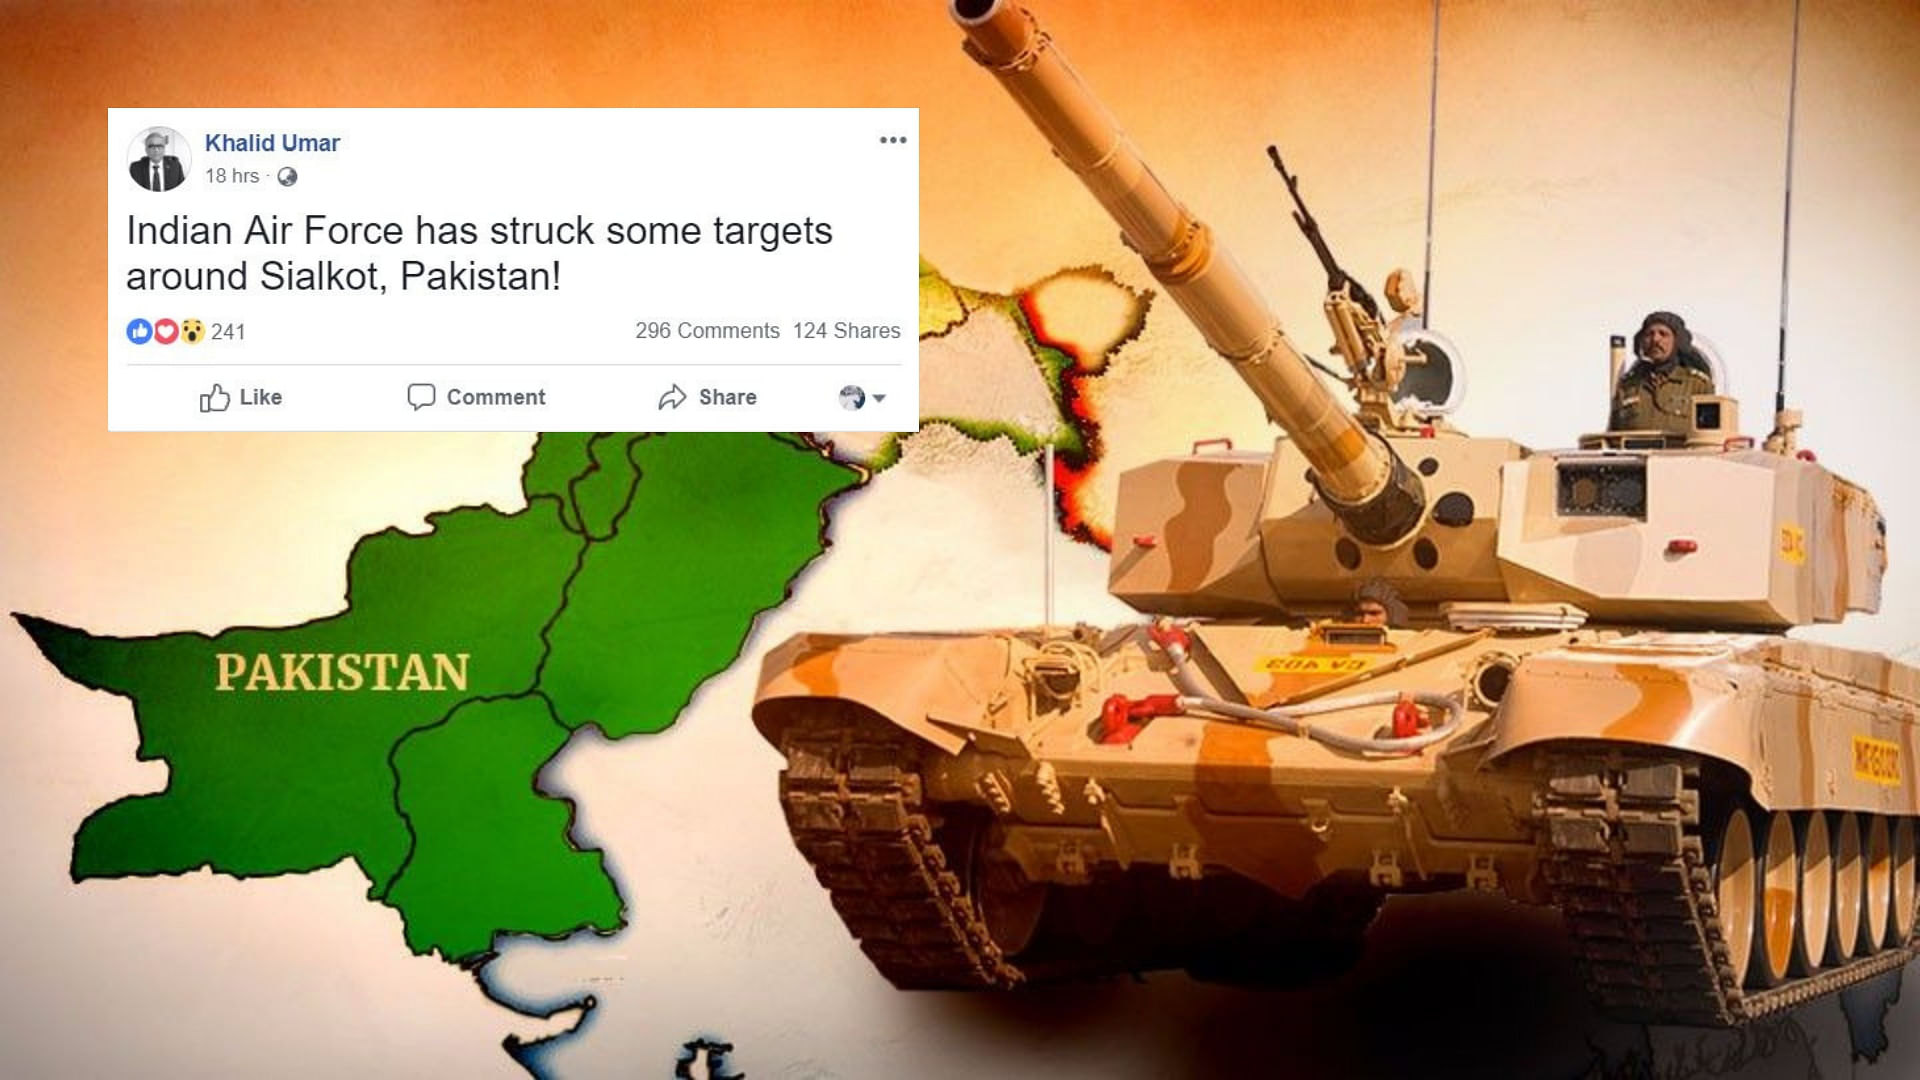 Many took to Twitter after mistaking sonic booms from Pakistan Air Force’s jets for war between India and Pakistan.